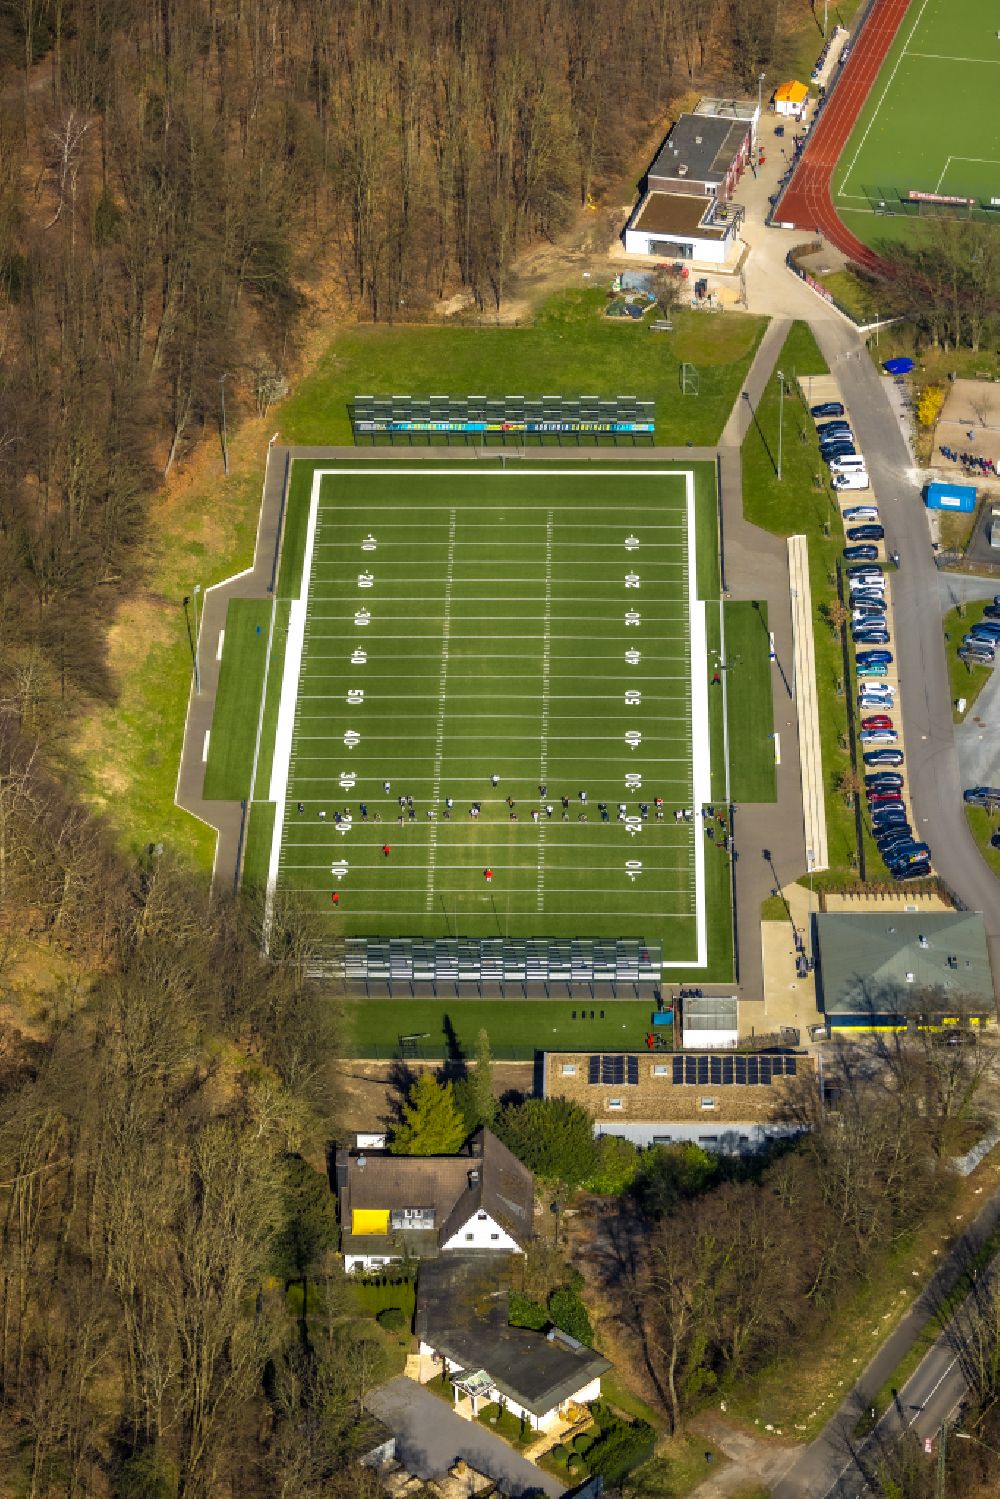 Aerial image Kettwig - Sports field american football of the soccer sports club Kettwig e.V. on Ruhrtalstrasse in Kettwig in the state North Rhine-Westphalia, Germany